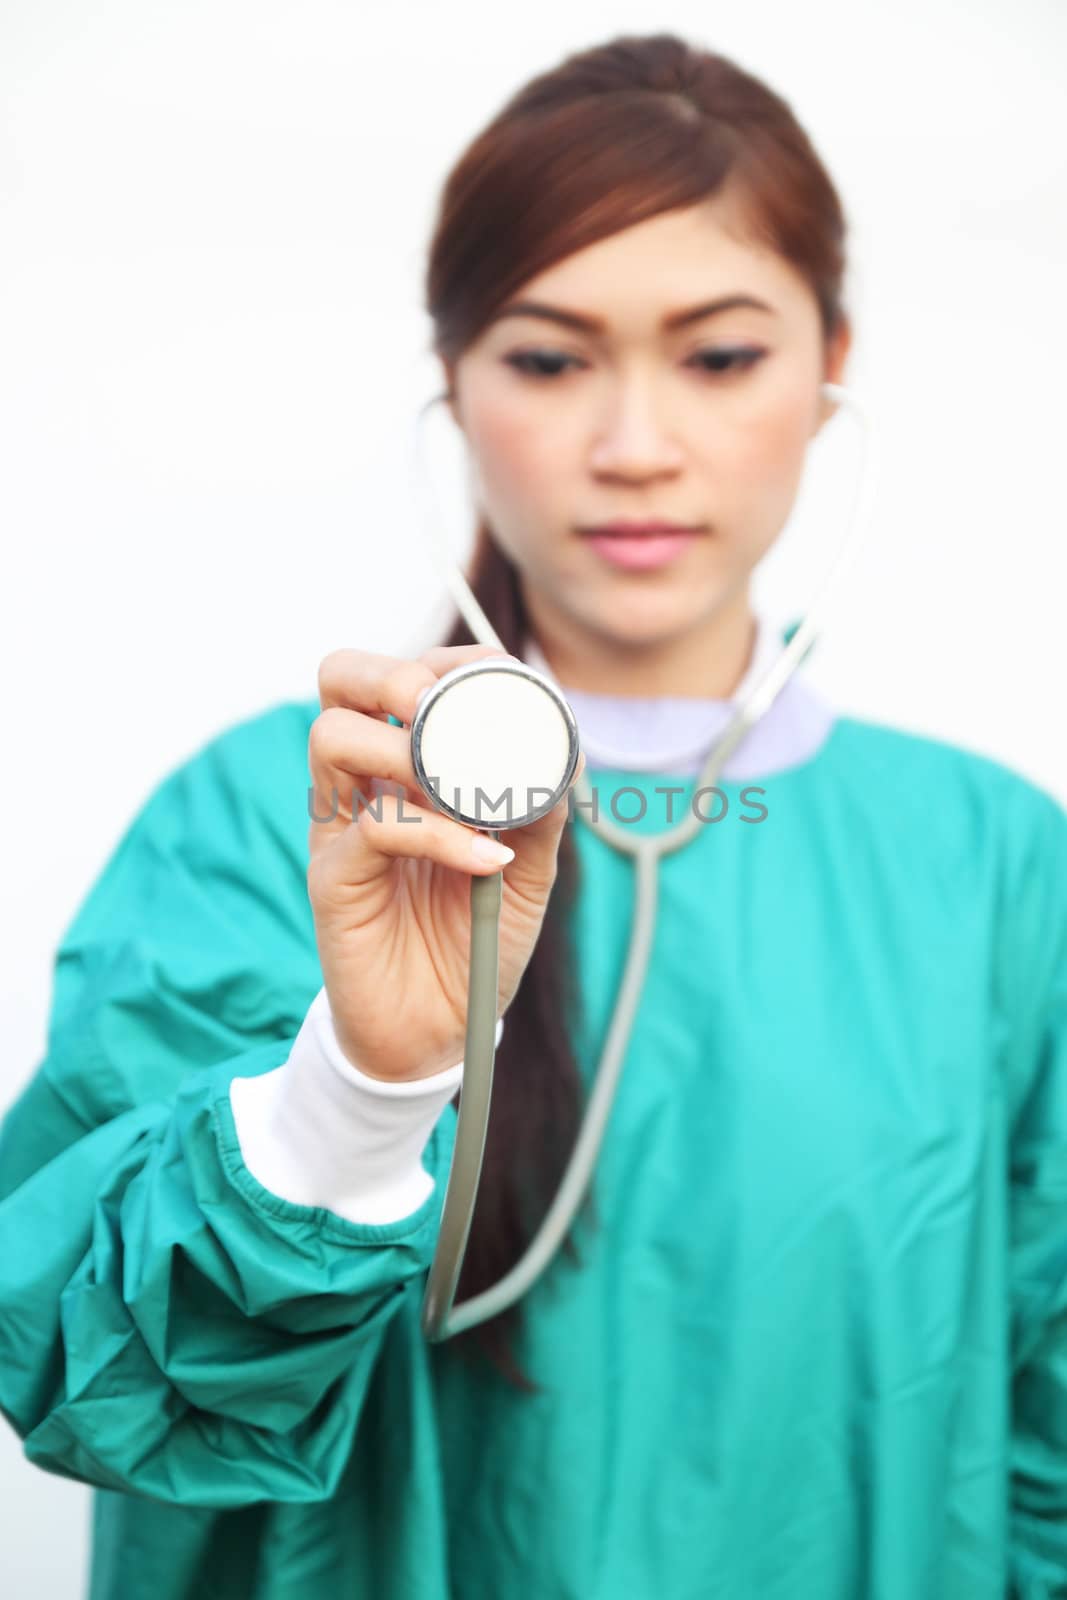 female doctor wearing a green scrubs and stethoscope by geargodz